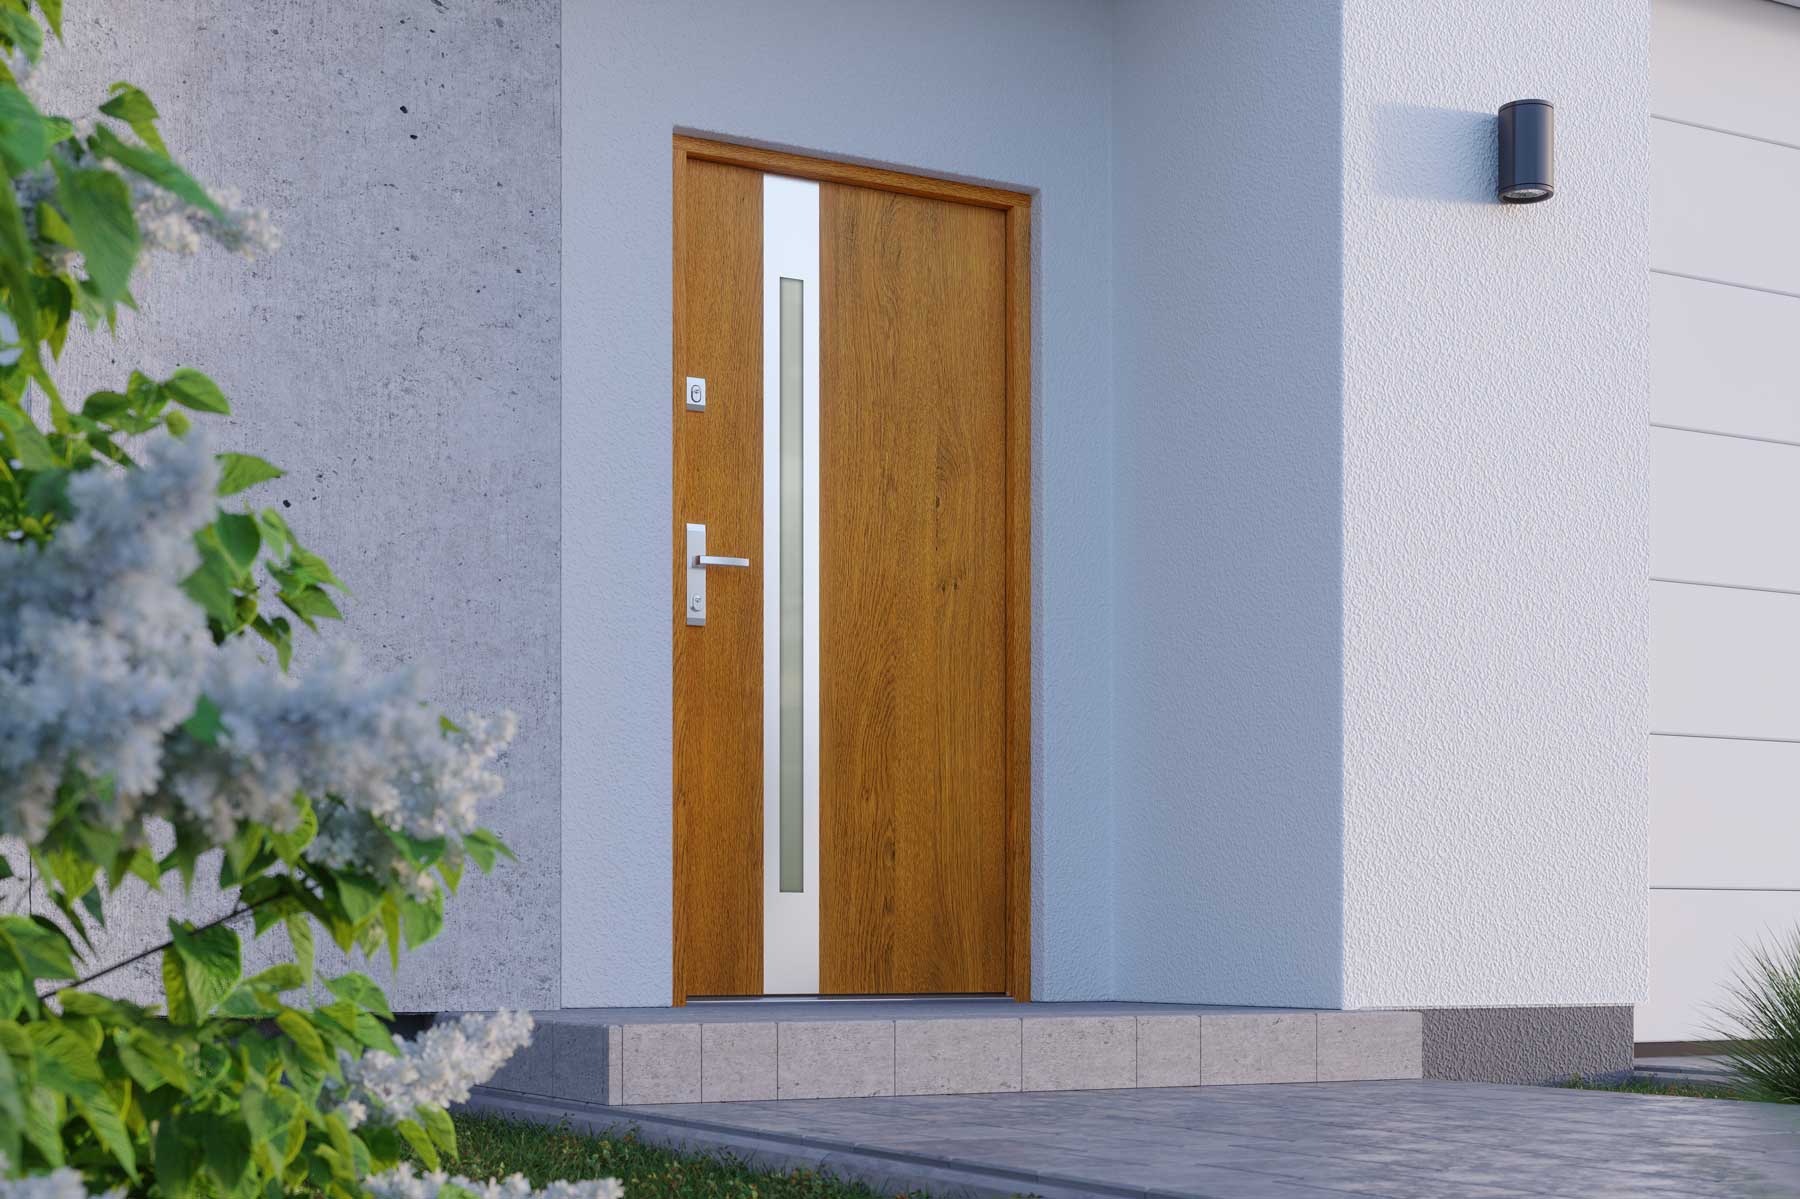 How Much Does a Gerda Door Cost?